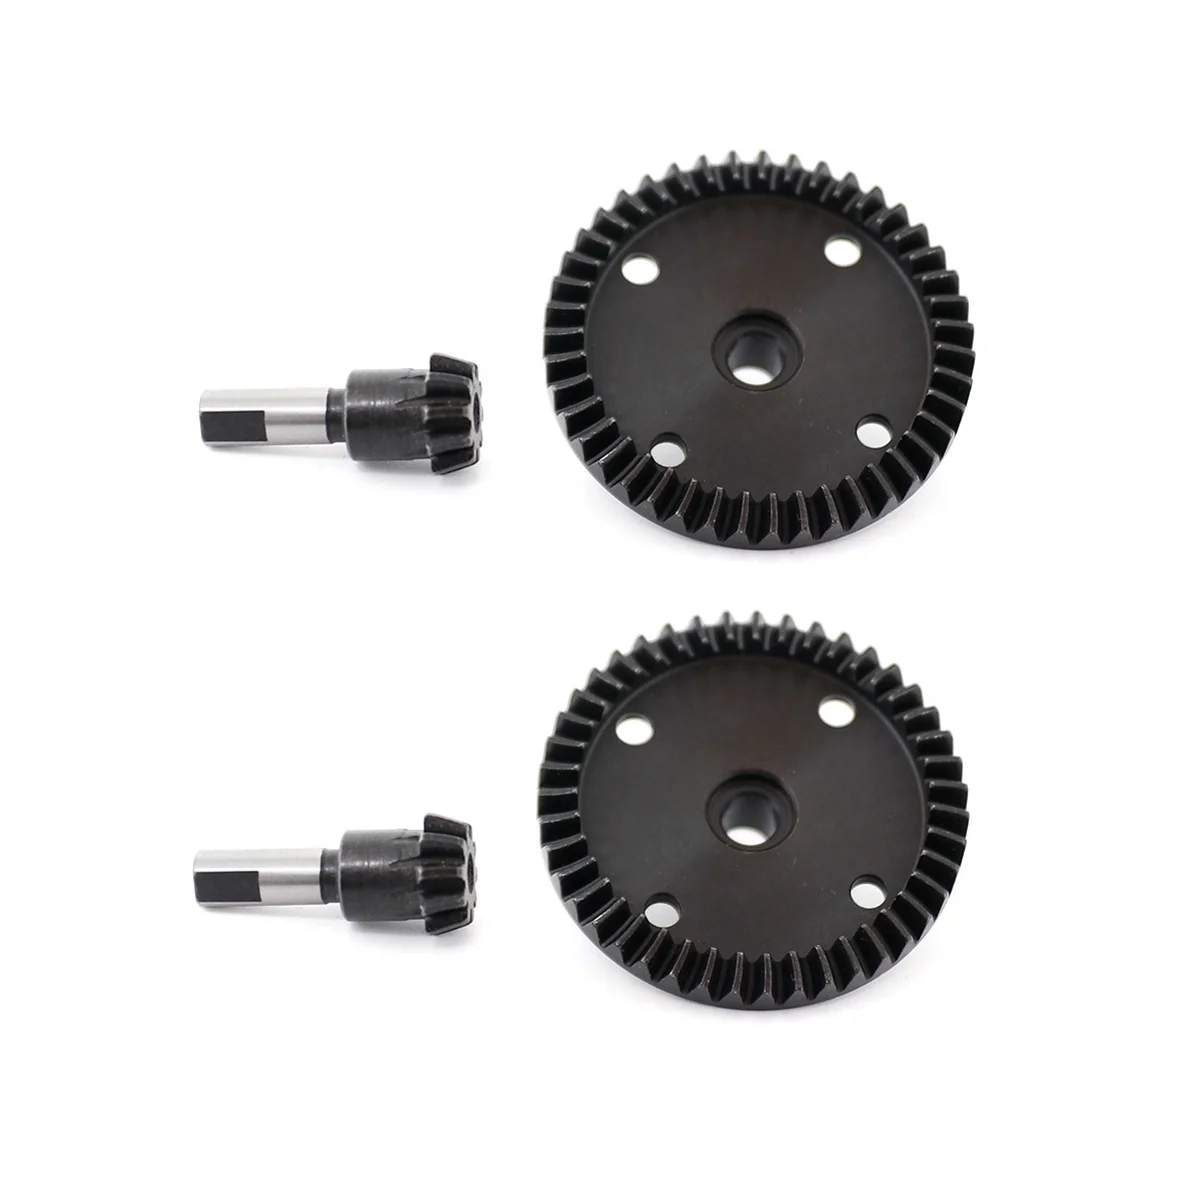 

2 Set Main Diff Gear 43T and Input Gear 10T for Arrma 1/7 Fireteam Mojave 1/8 Kraton Notorious Outcast 6S Upgrade Parts